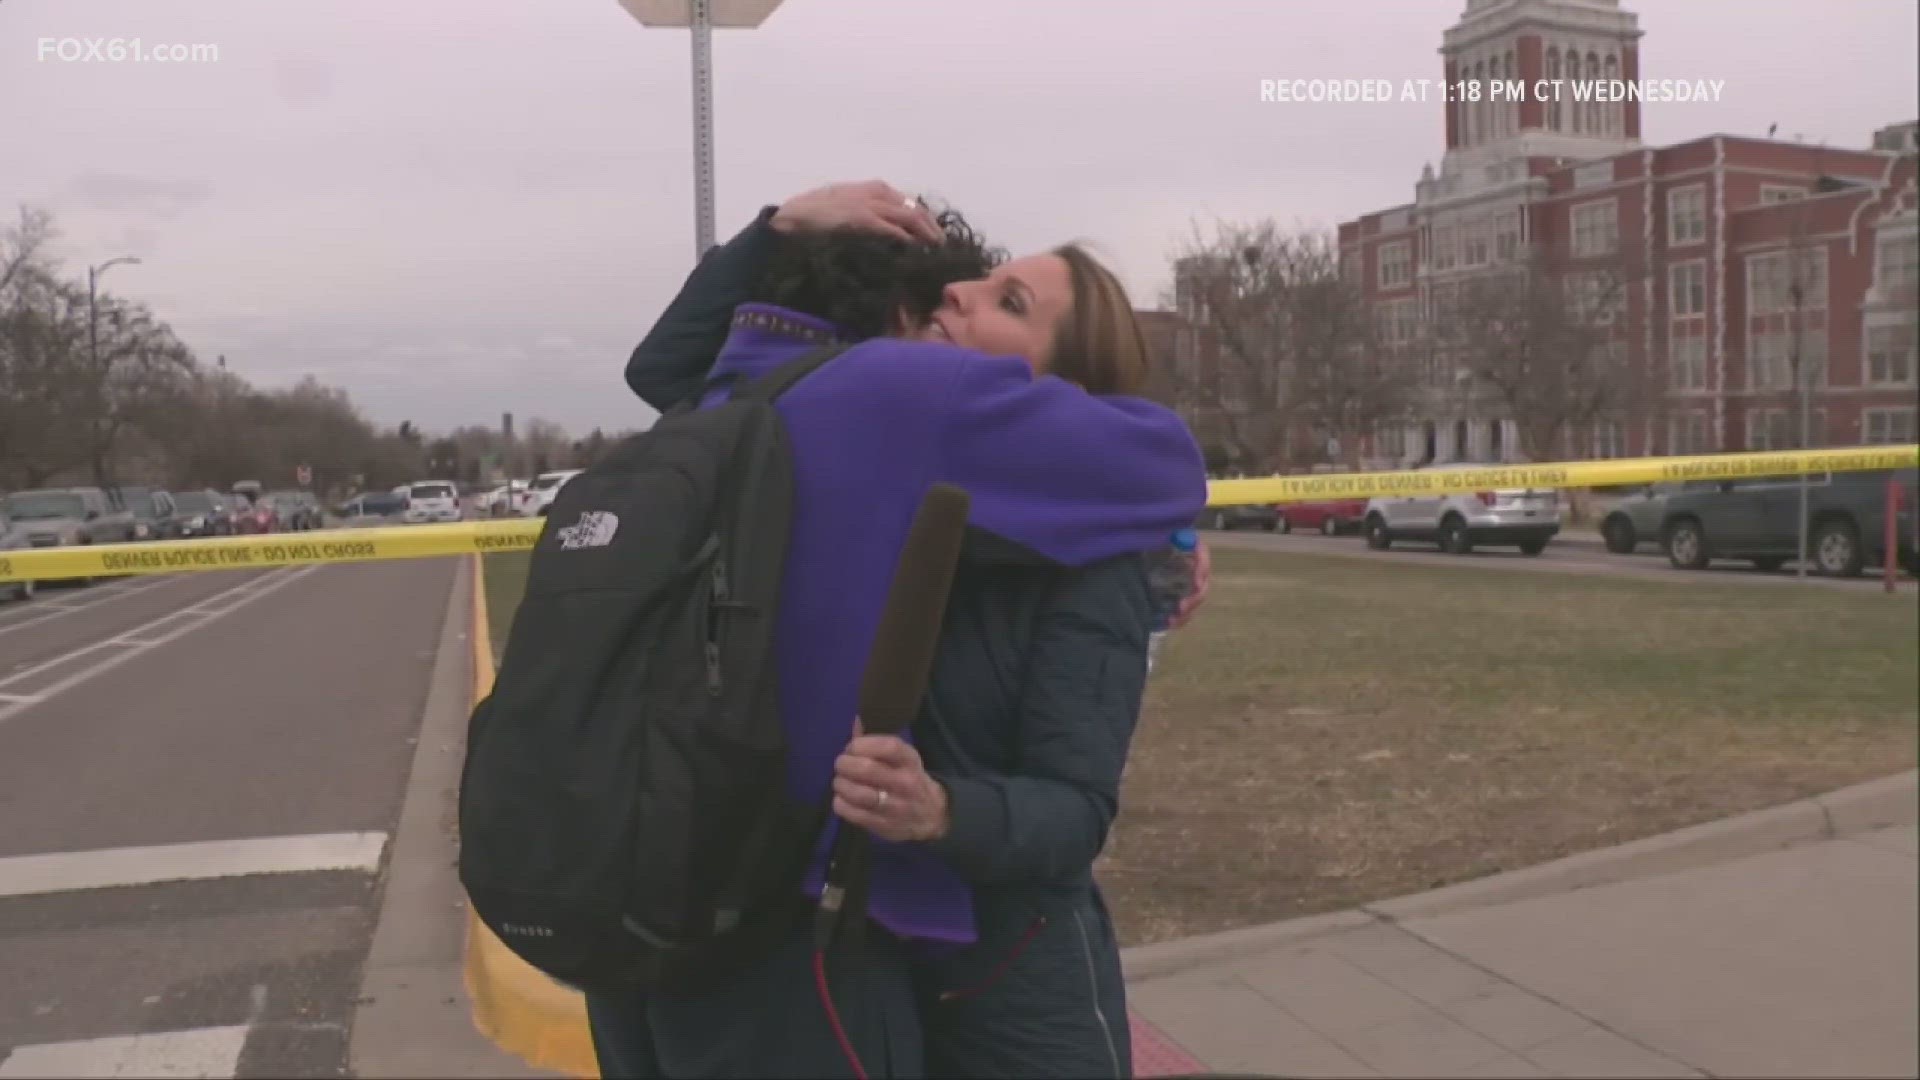 Fox News Reporter Alicia Acuna reunited with her son while live and in the middle of a report in Denver after a shooting happened at East High School.